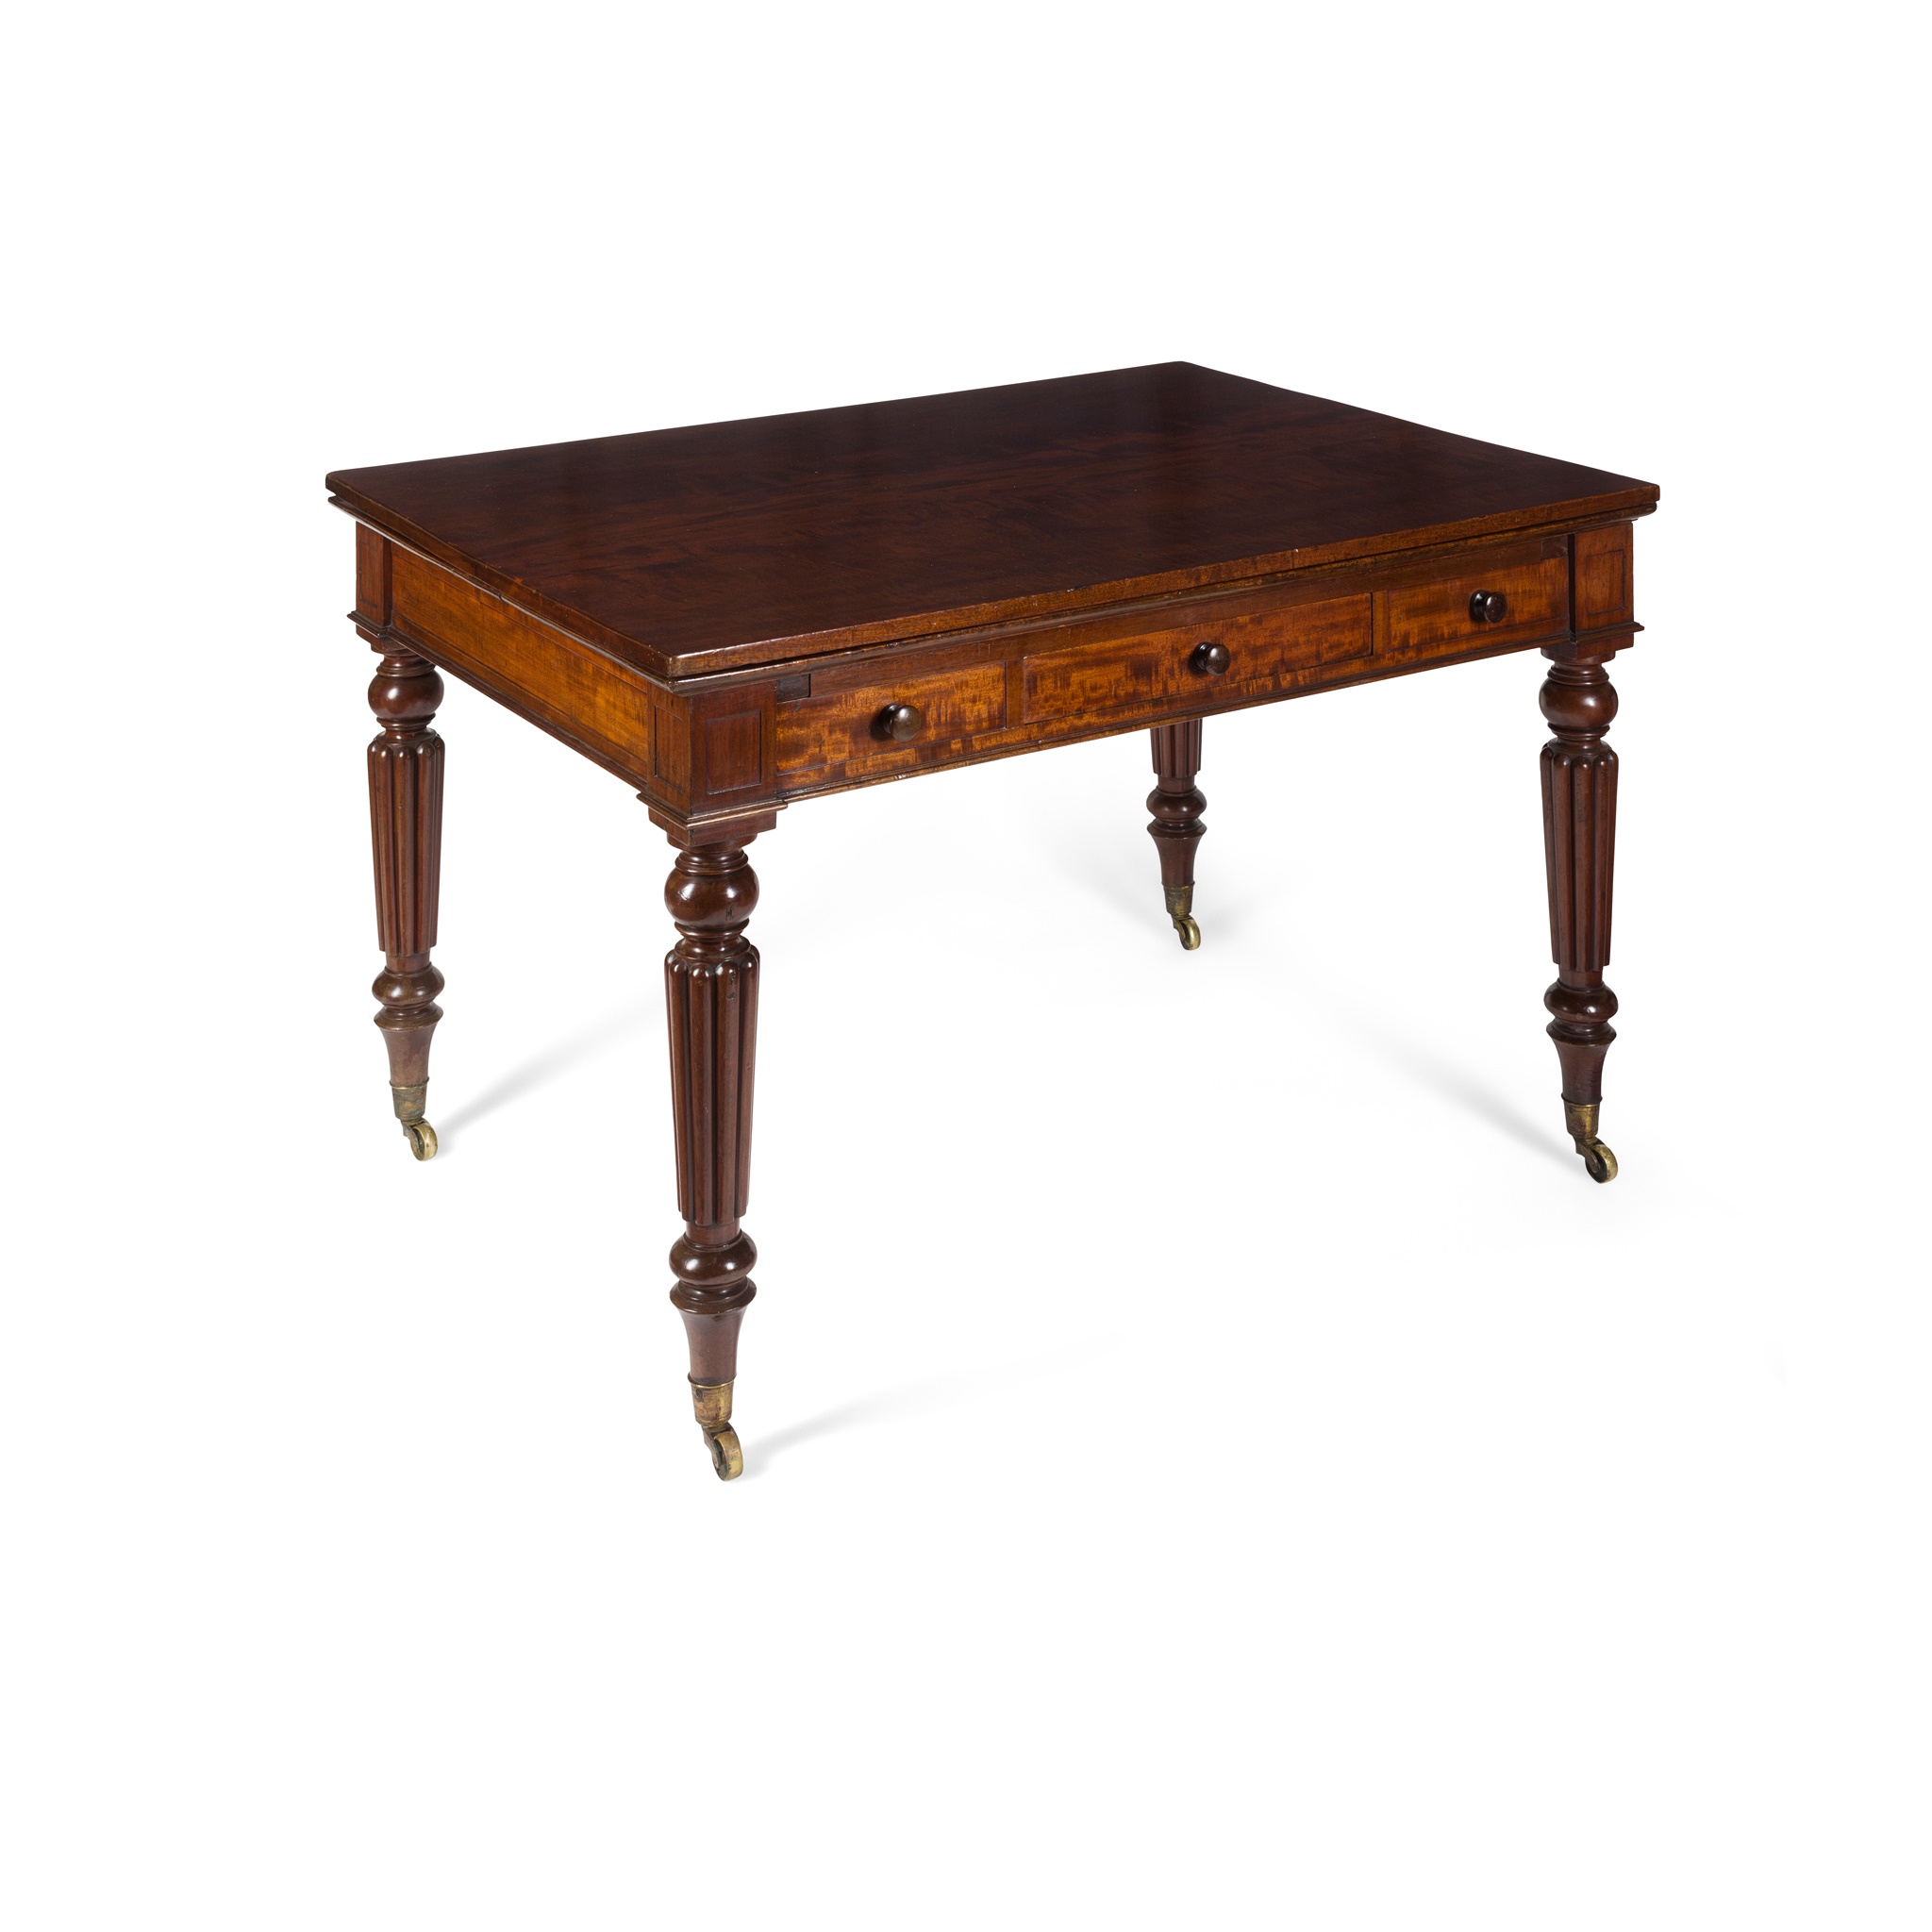 REGENCY MAHOGANY EXTENDING LIBRARY TABLE BY GILLOWS OF LANCASTER EARLY 19TH CENTURY